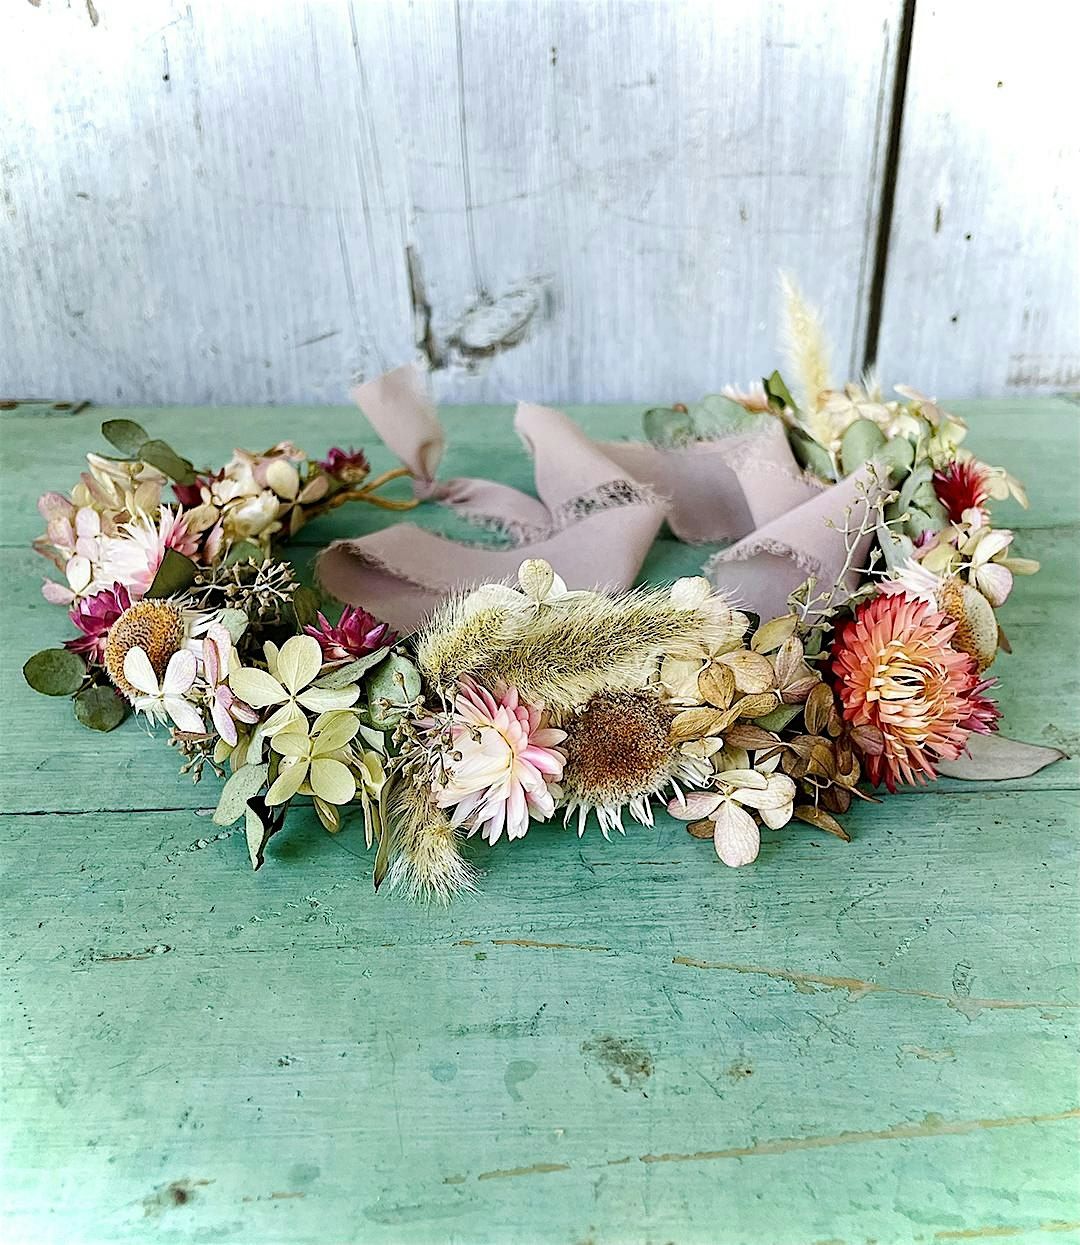 Everlasting Flower Crowns-  learn to make flower crowns with dried flowers